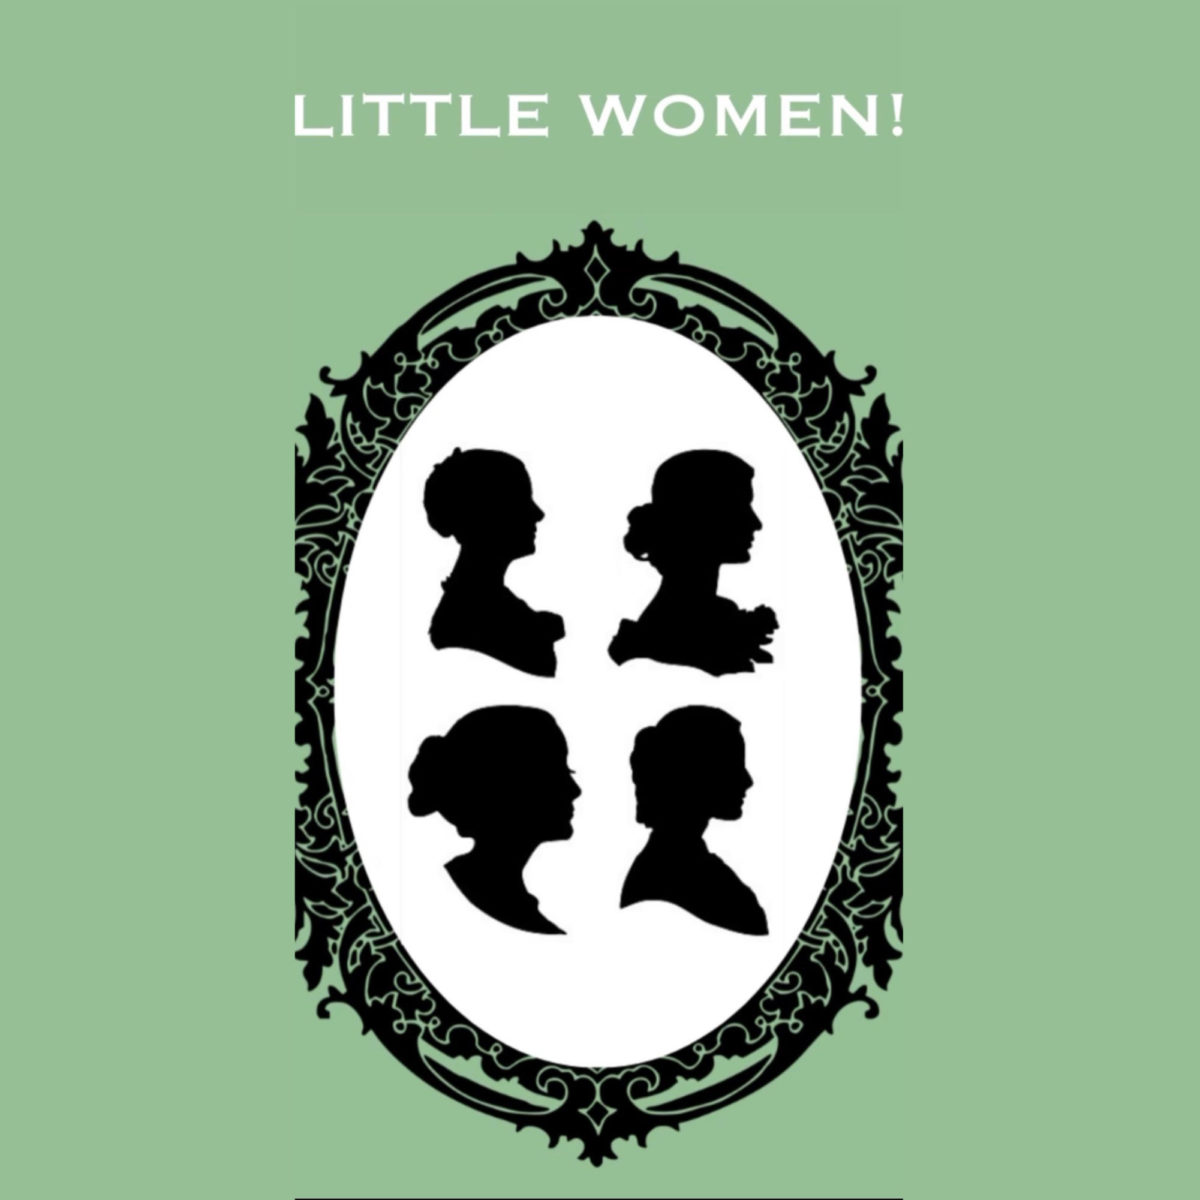 The+official+poster+for+Little+Women+